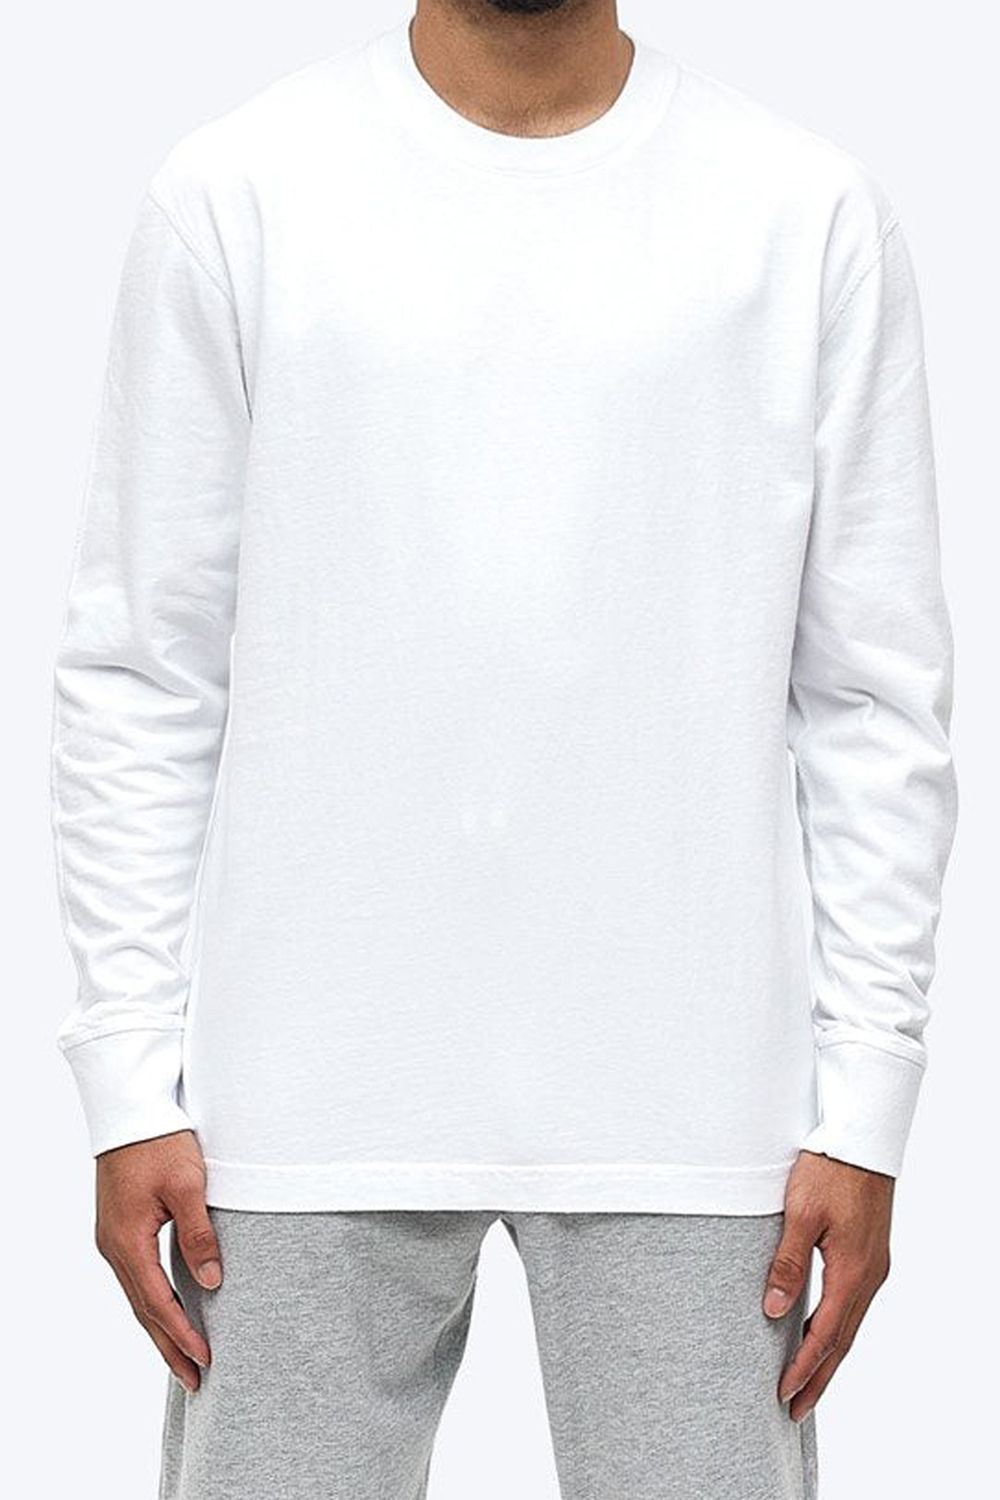 REIGNING CHAMP - 【期間限定ポイント10倍】 【国内正規品】 MIDWEIGHT ...